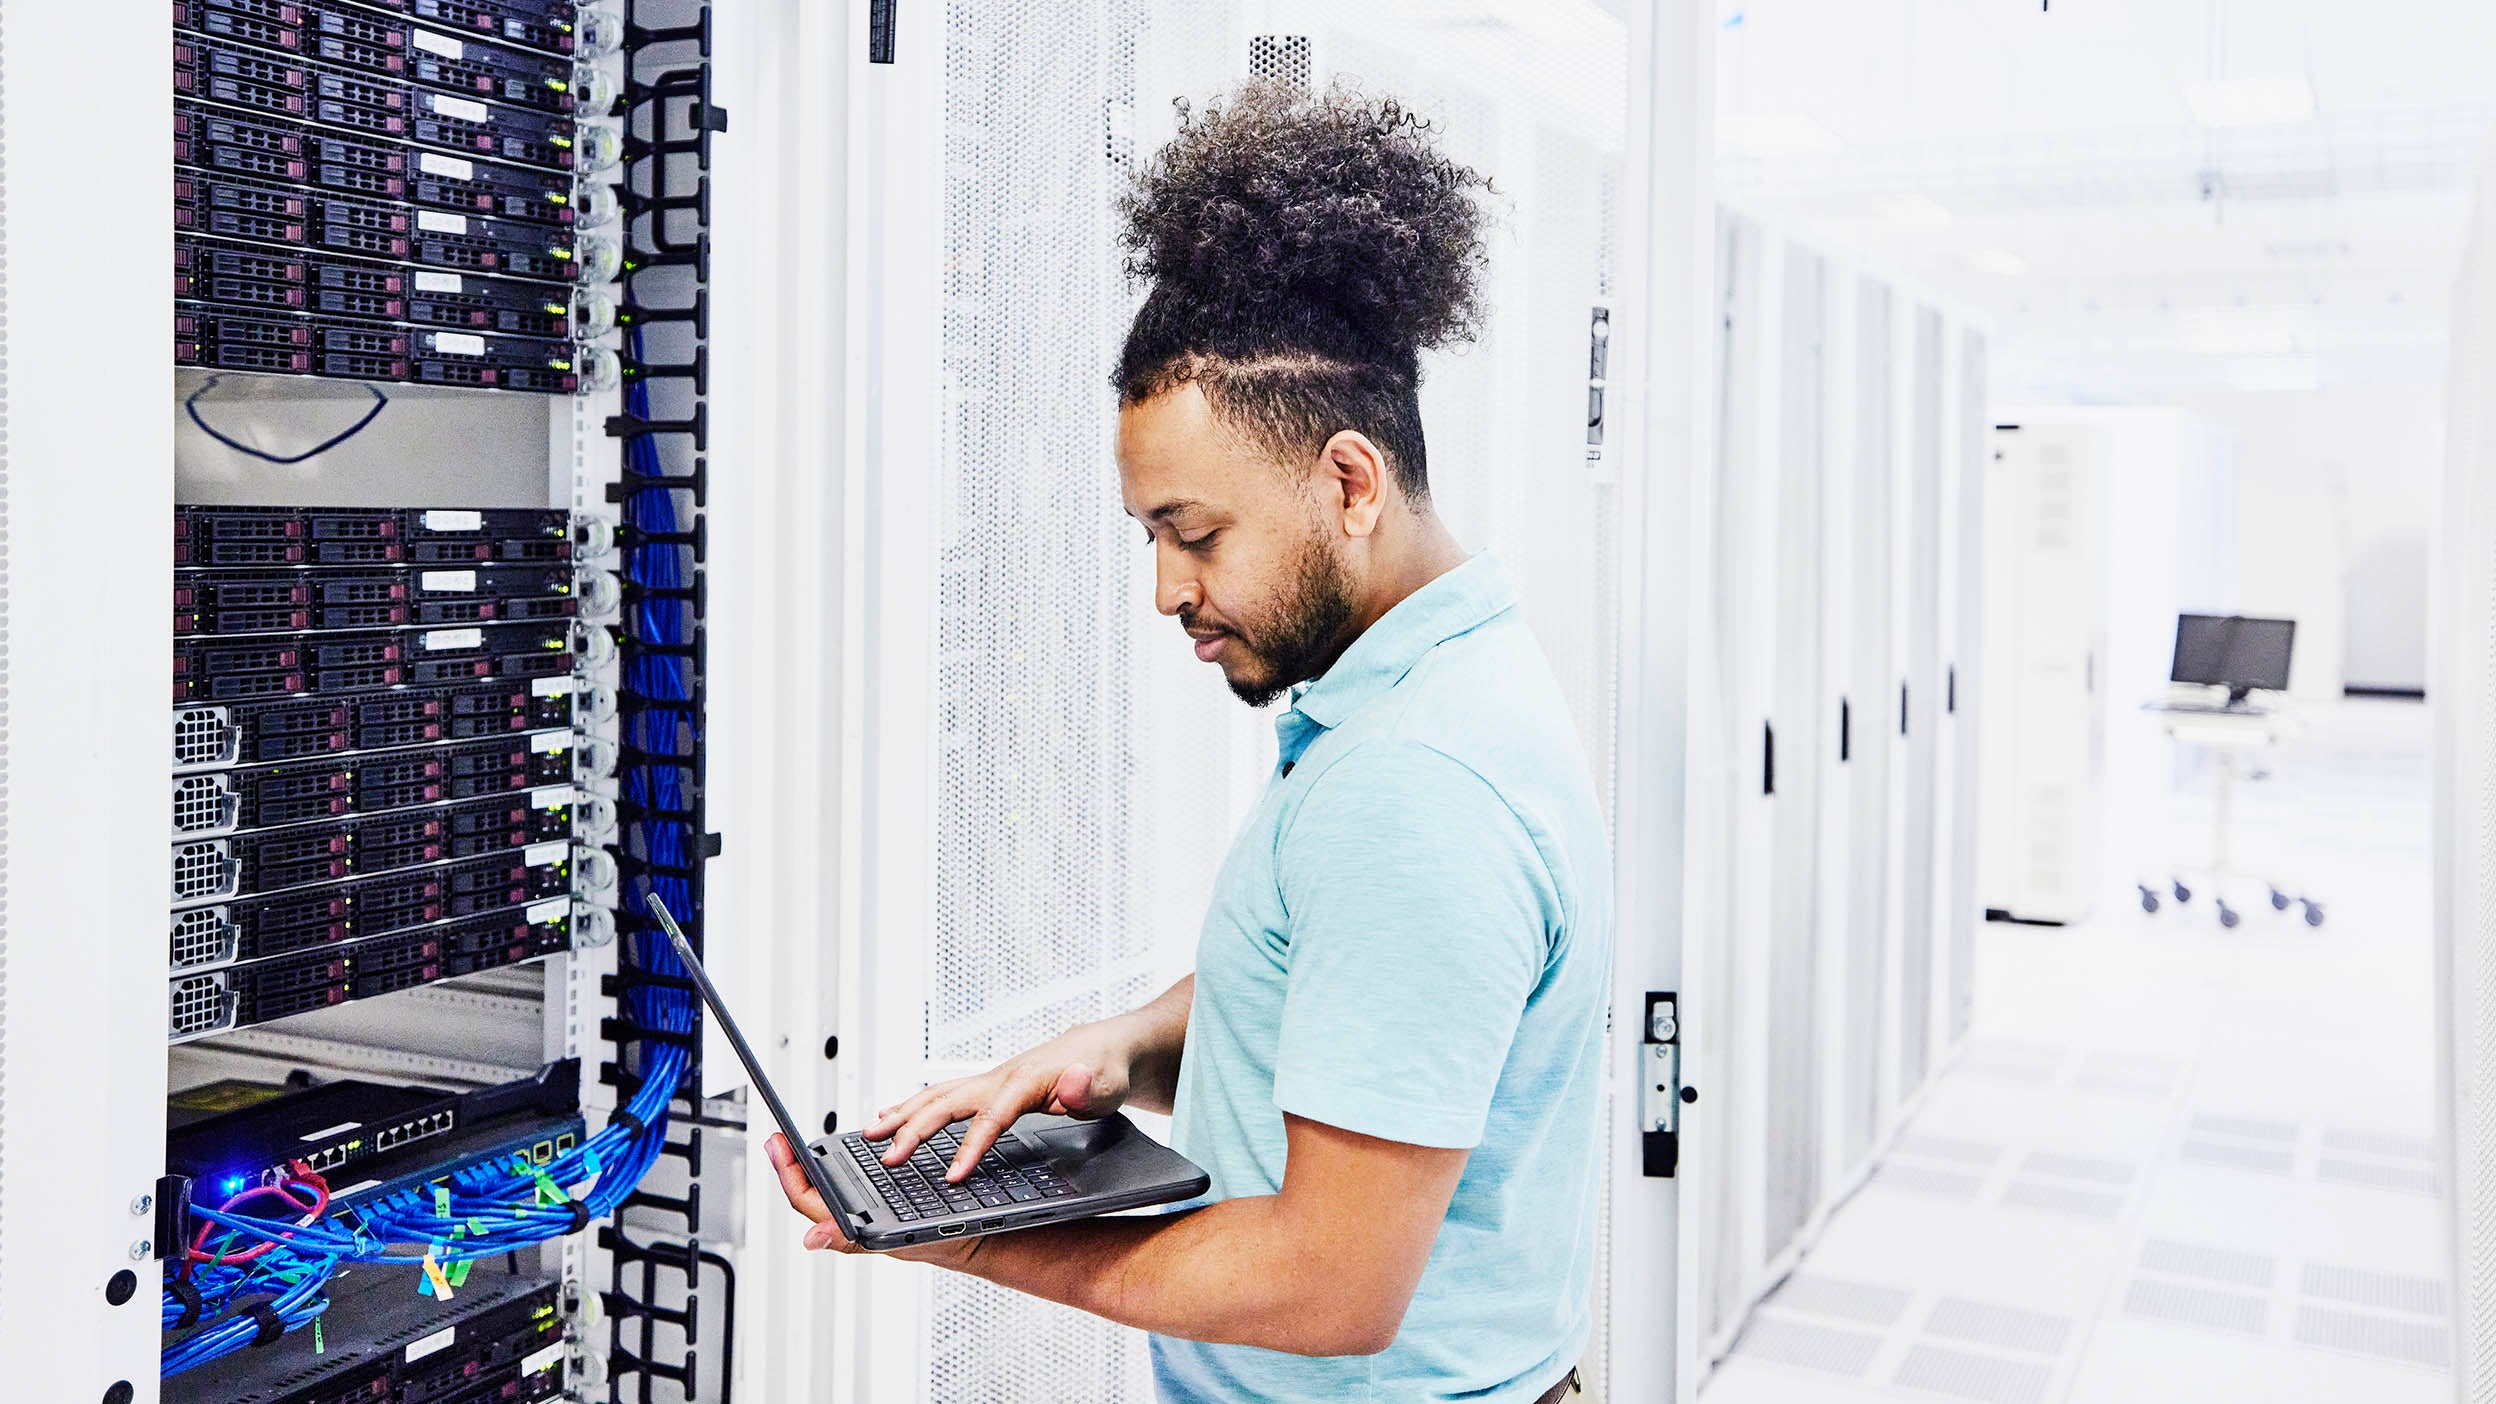 Young technician pictured working in a type of data center that cybersecurity companies featured among the Invesco QQQ holdings help protect.